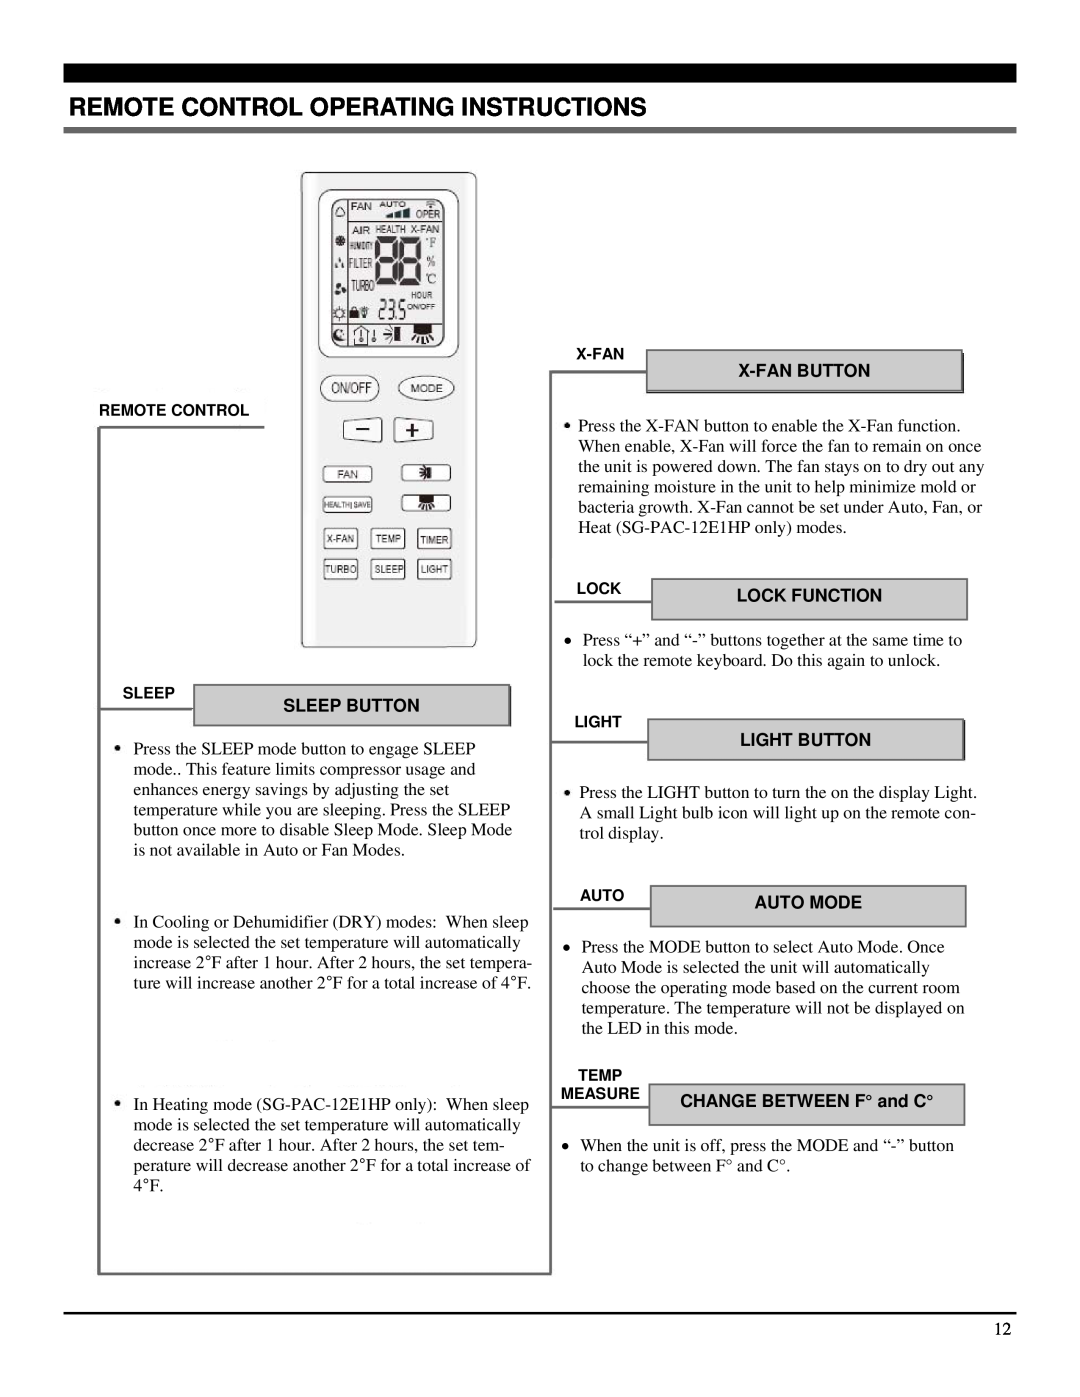 Soleus Air SG-PAC-12E1HP Remote Control Operating Instructions, Sleep Button, X-Fanbutton, Lock Function, Light Button 